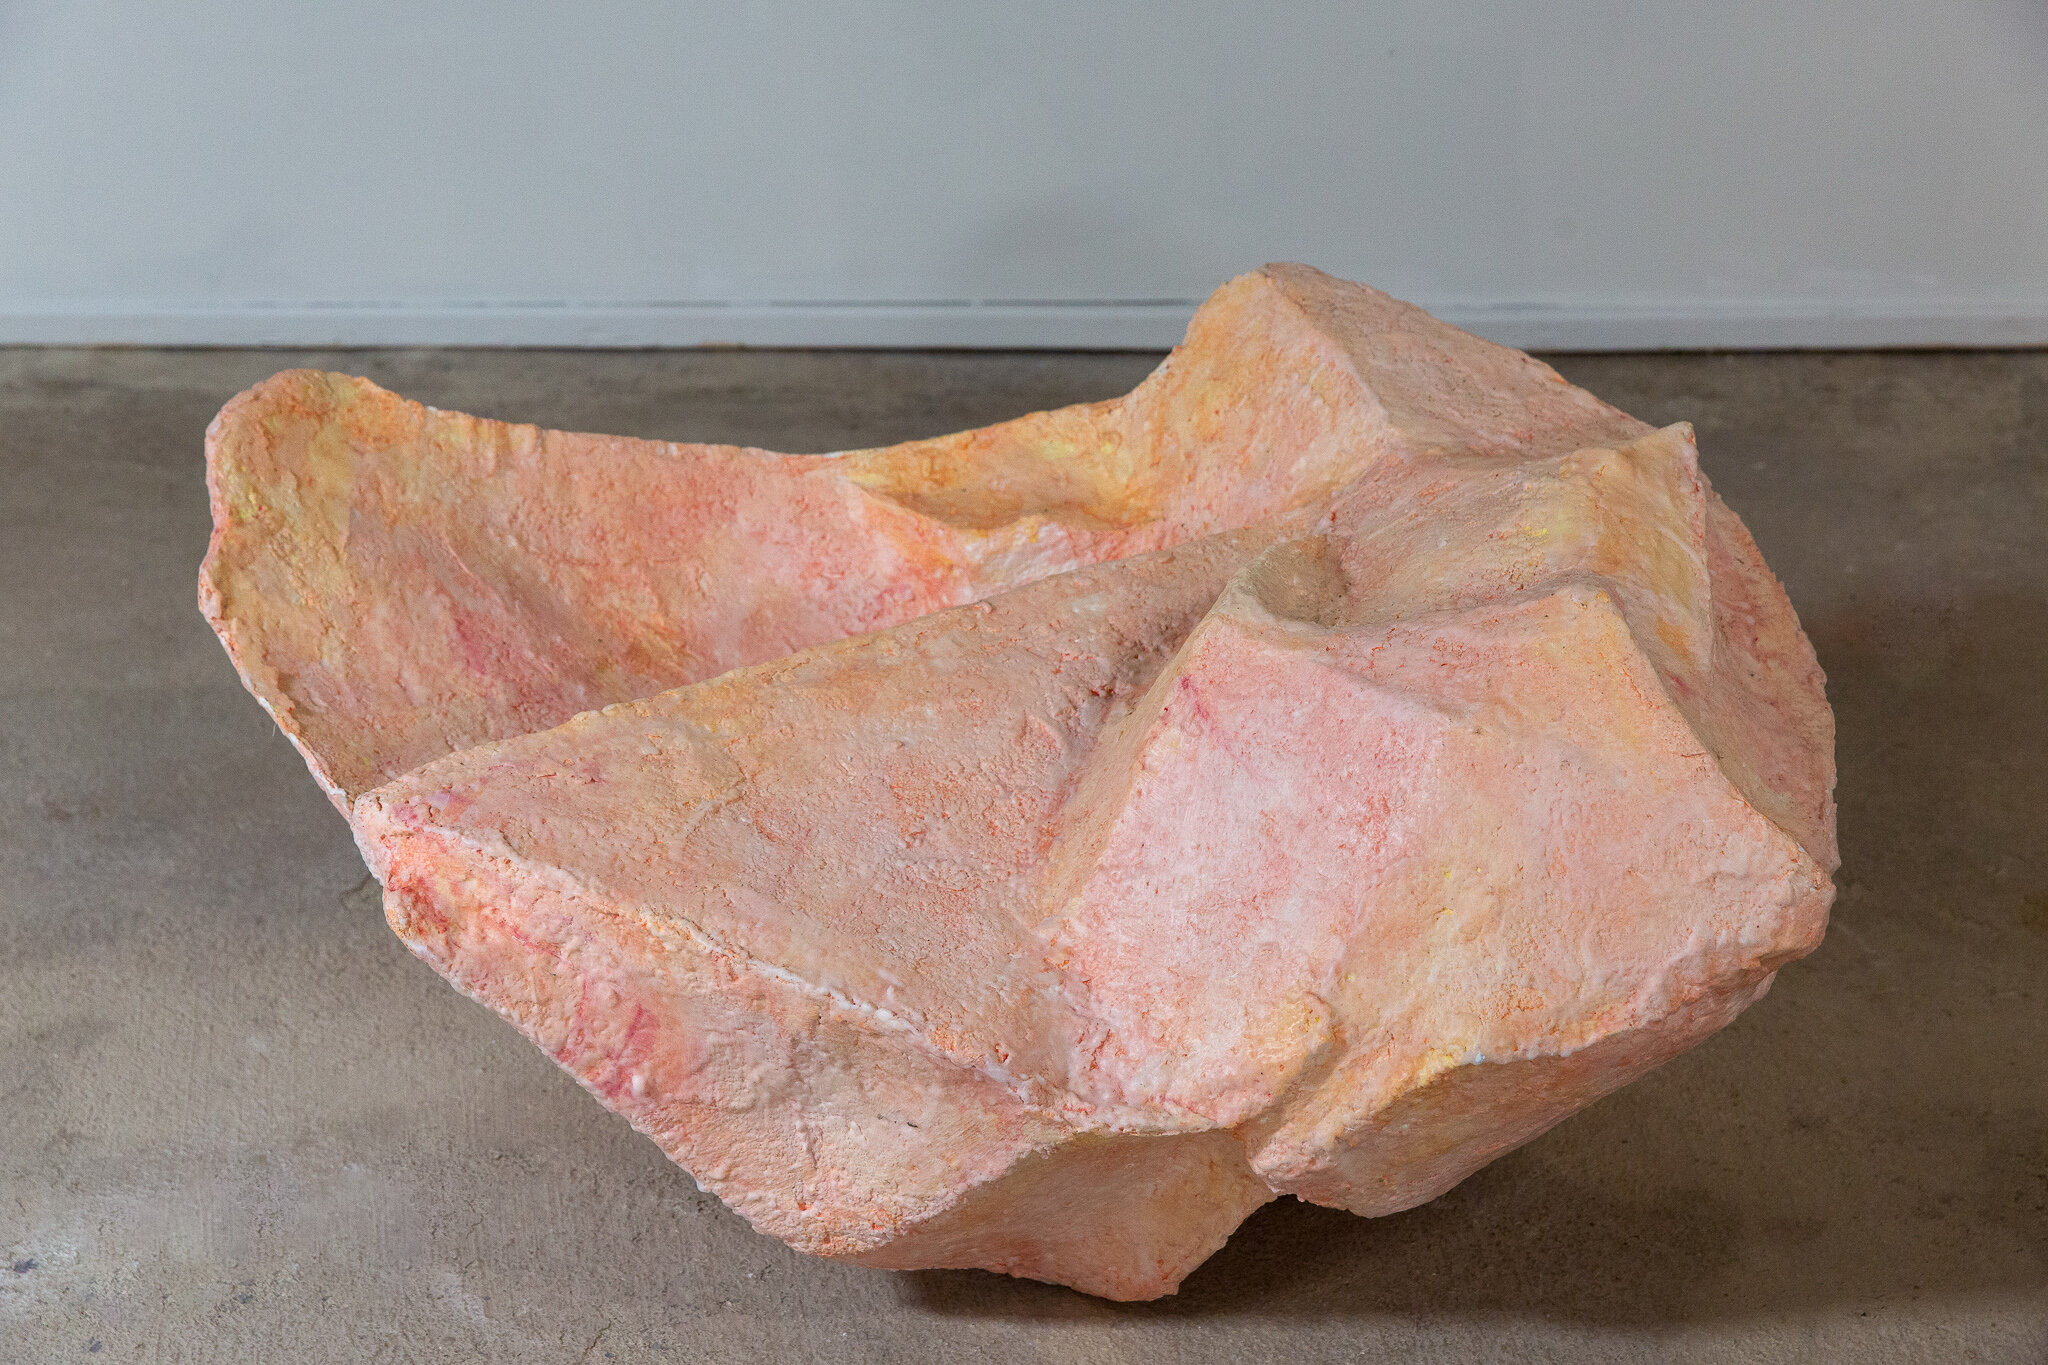   Large Sample , 2020 Cardboard (from recycling bin) plaster, paper pulp, paint and encaustic, 20x42x18 inches 